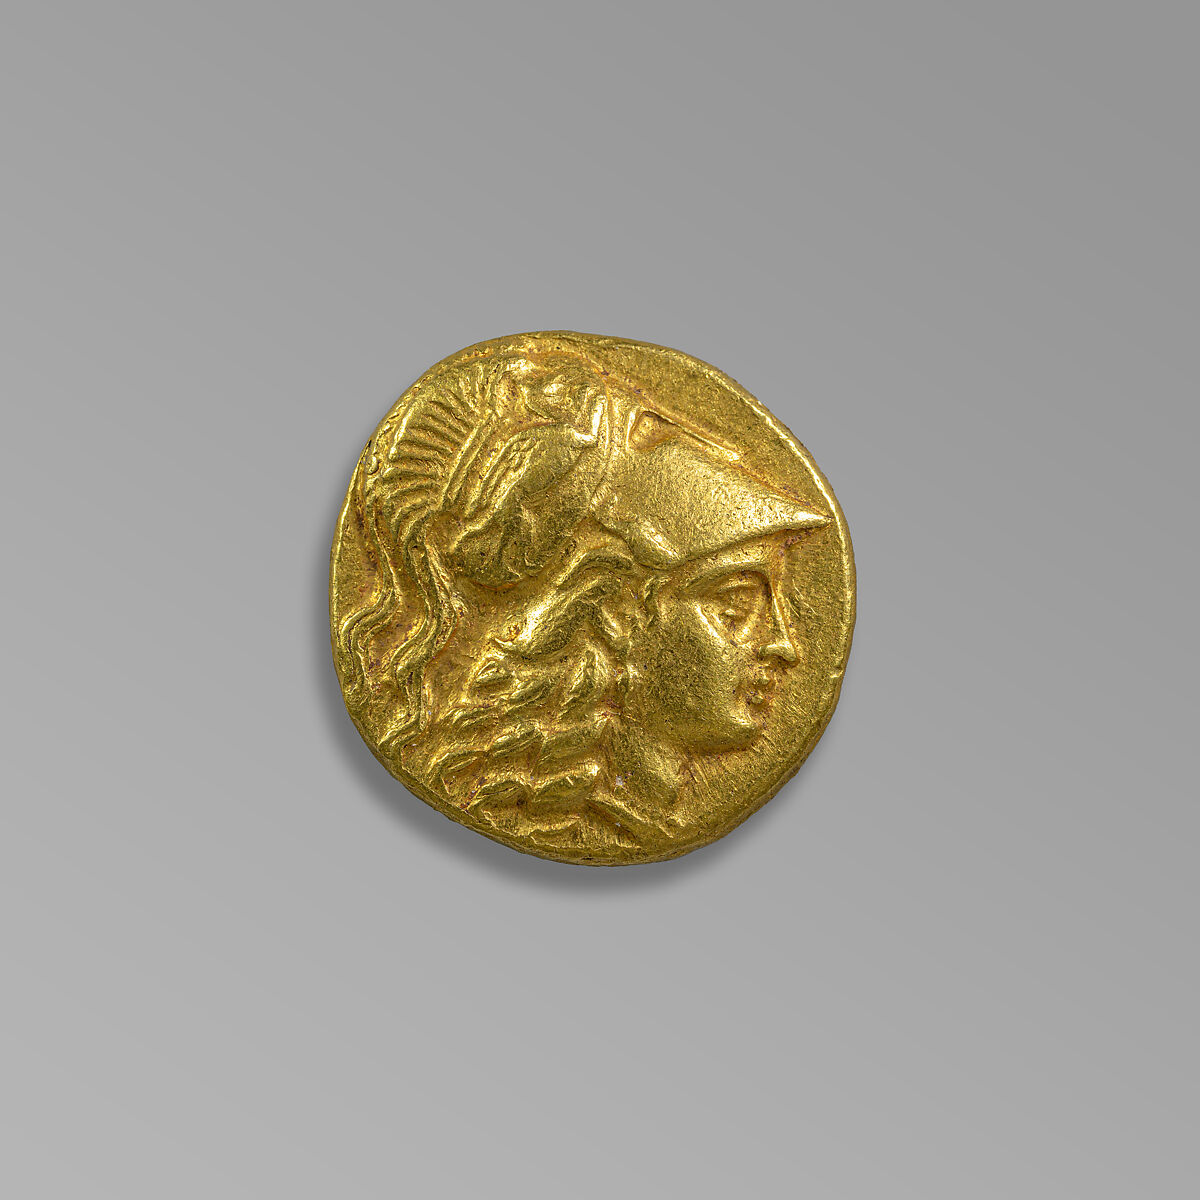 Gold stater of Alexander the Great, Gold, Macedonia 